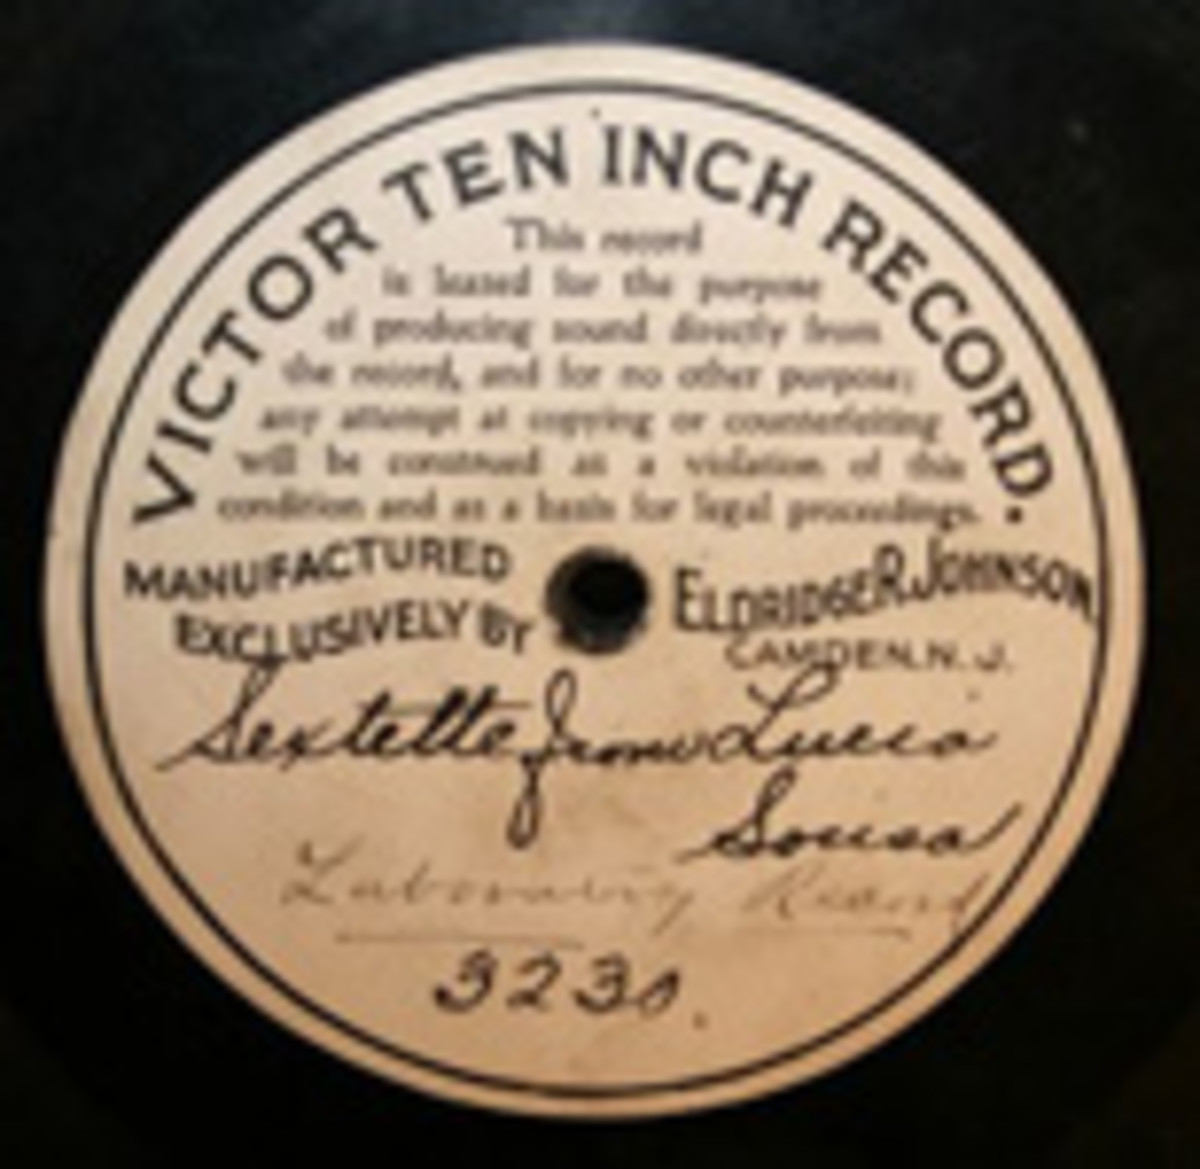 Sextette 10-inch Victor